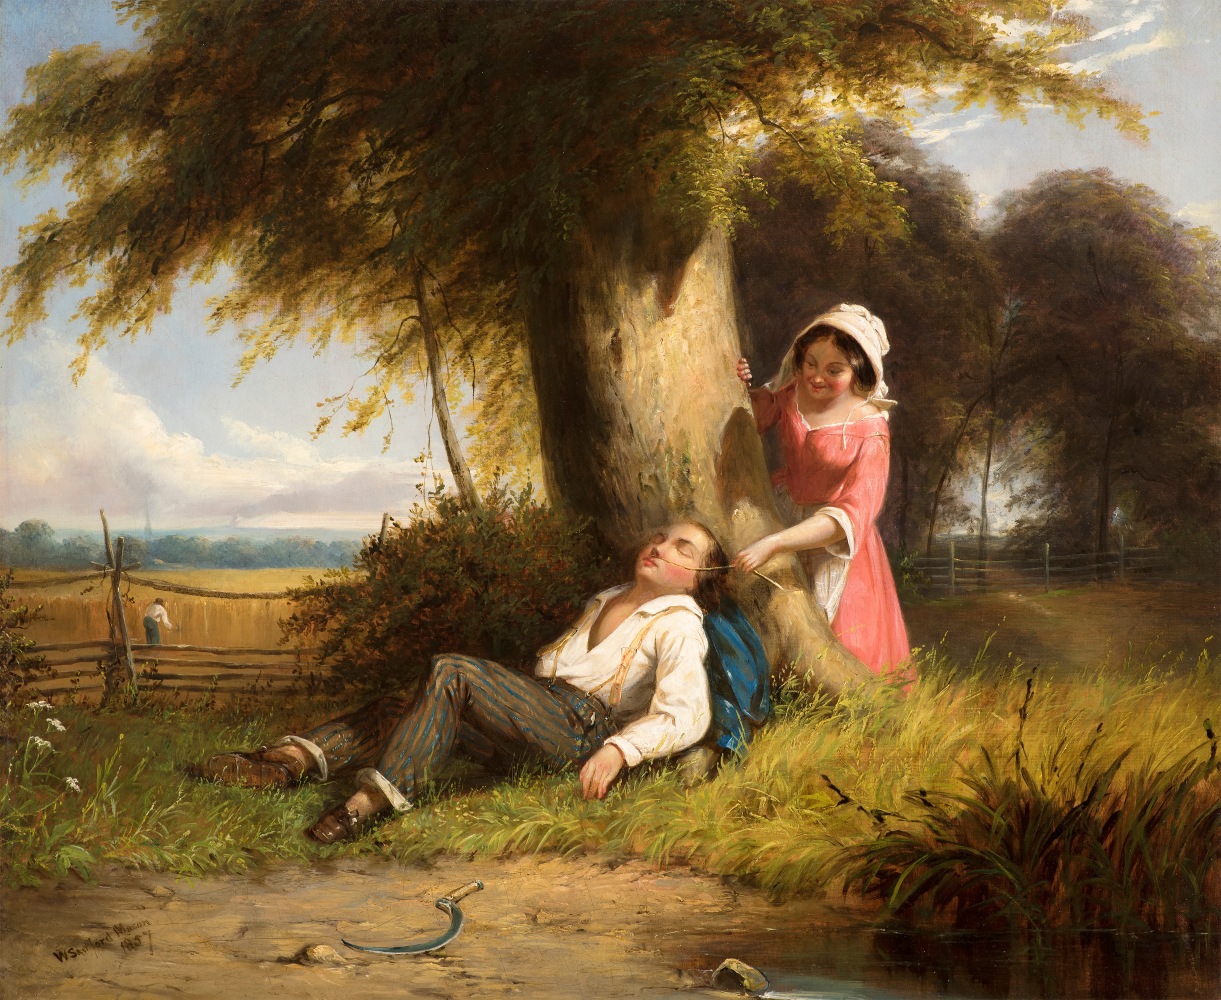 William Sanford Mason (1824–1864), Caught Napping, 1857, oil on canvas, 20 x 24 1/4 in., signed and dated lower right: W. Sanford Mason